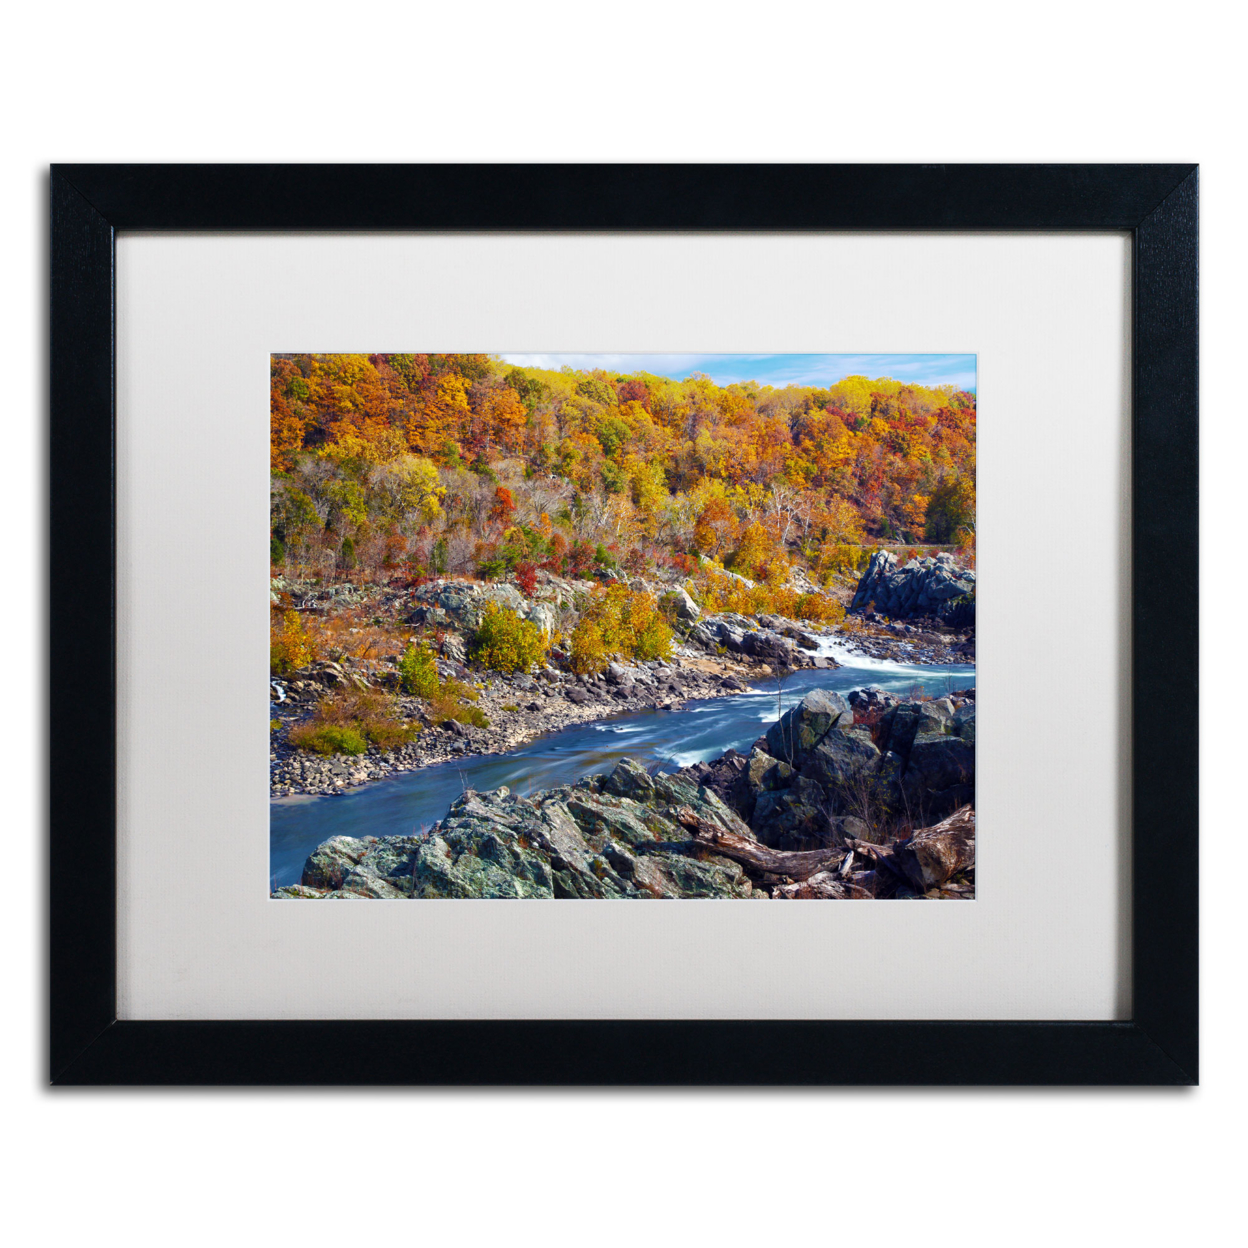 CATeyes 'Potomac Autumn' Black Wooden Framed Art 18 X 22 Inches